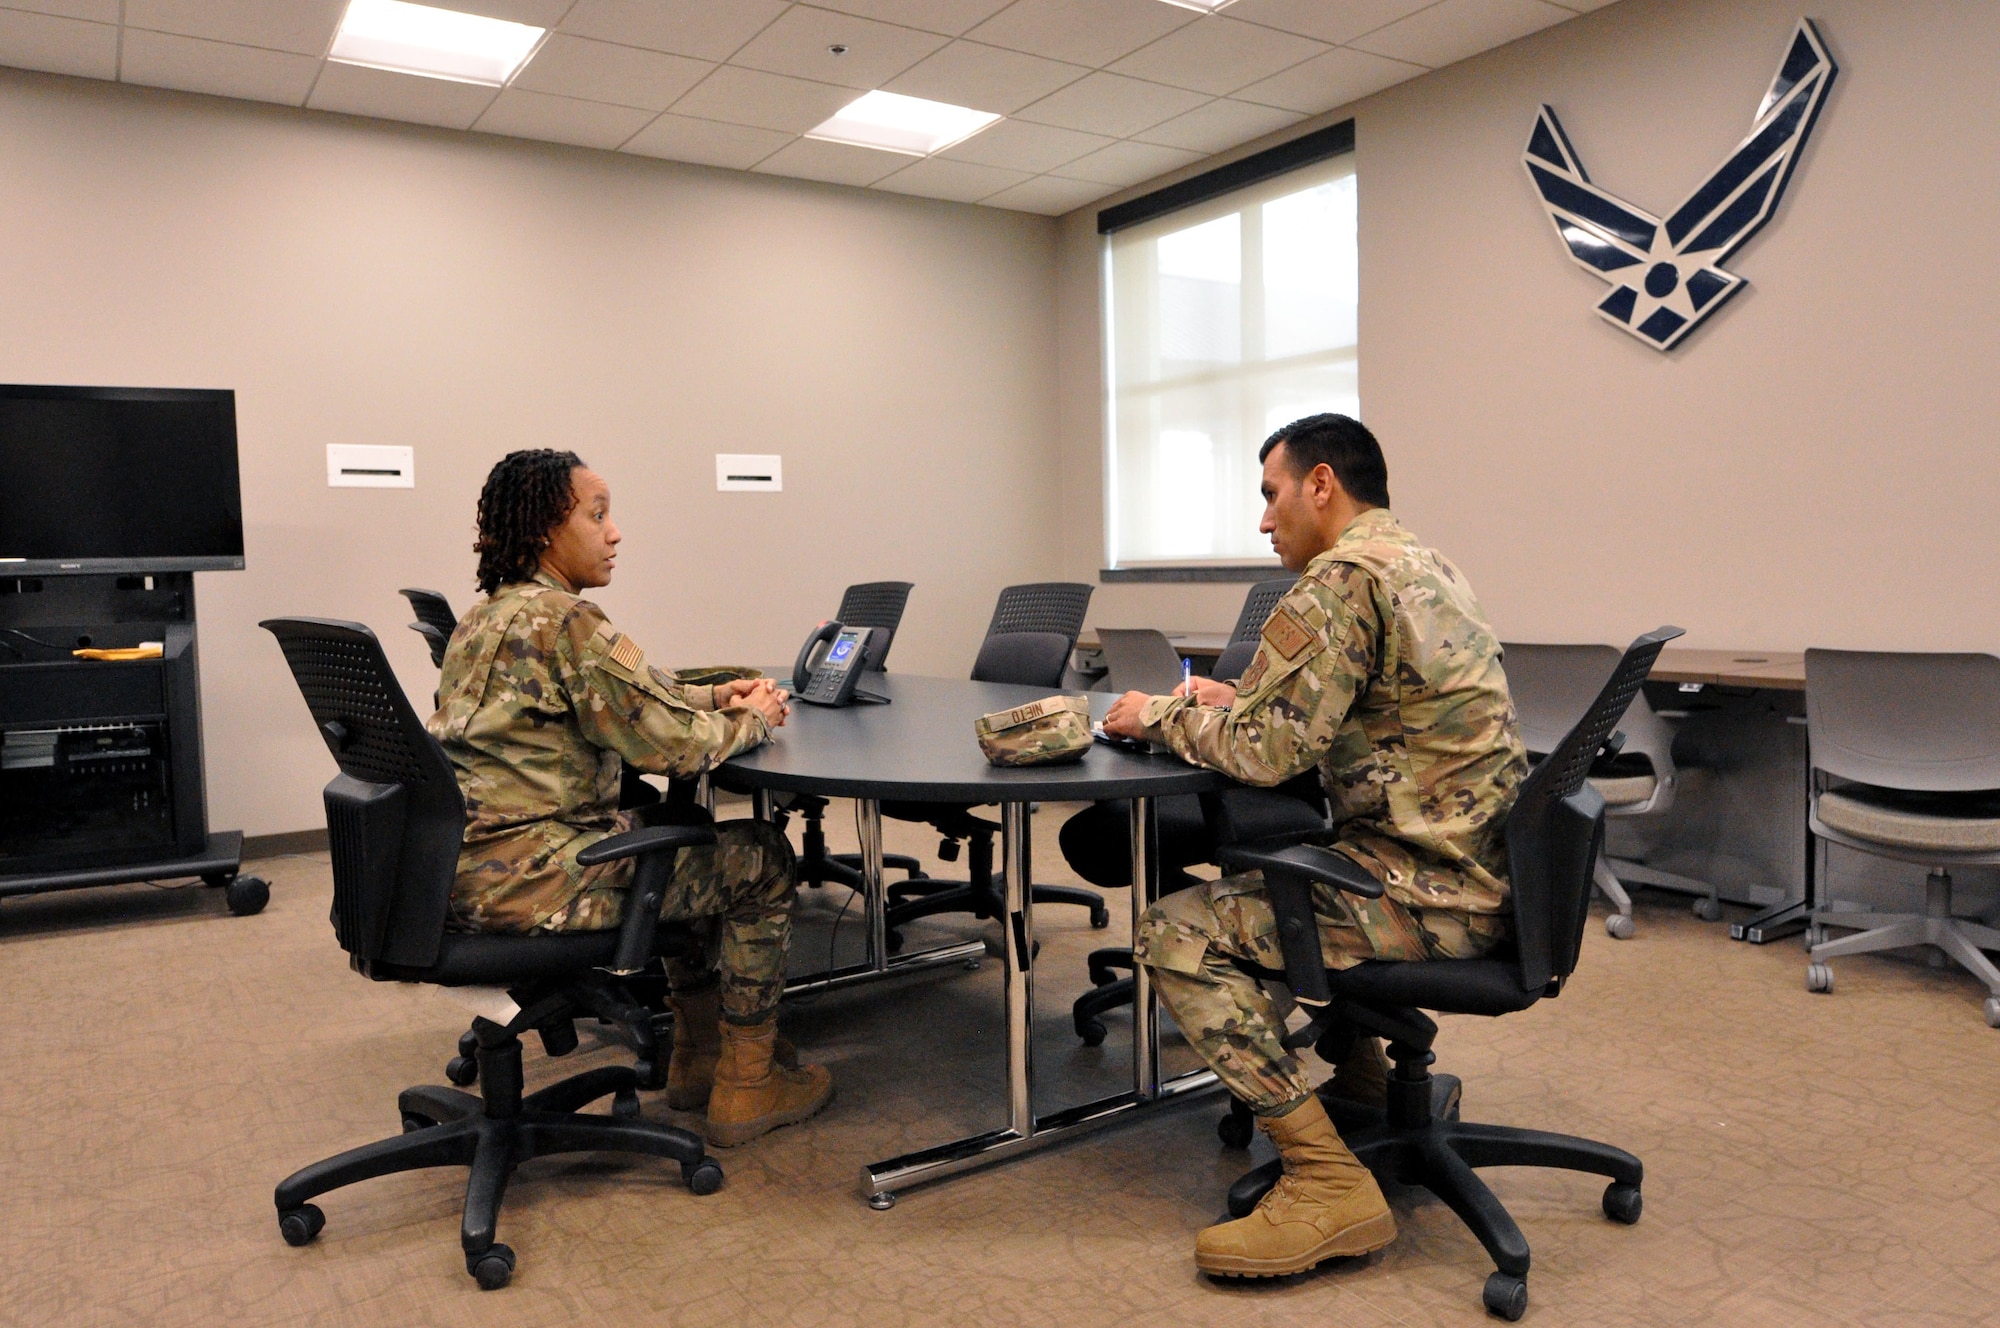 Senior Master Sgt. Traci Taylor, 301st Fighter Wing Education and Training specialist, and Airman 1st Class Emanuel Nieto, 301 FW Water and Fuel Systems Maintenance specialist, meet in the Education and Training Office’s new multi-use computer room in the newly renovated 301 FW headquarters building at Naval Air Station Joint Reserve Base Fort Worth, Texas, March 6, 2022. (U.S. Air Force photo by Staff Sgt. Randall Moose)